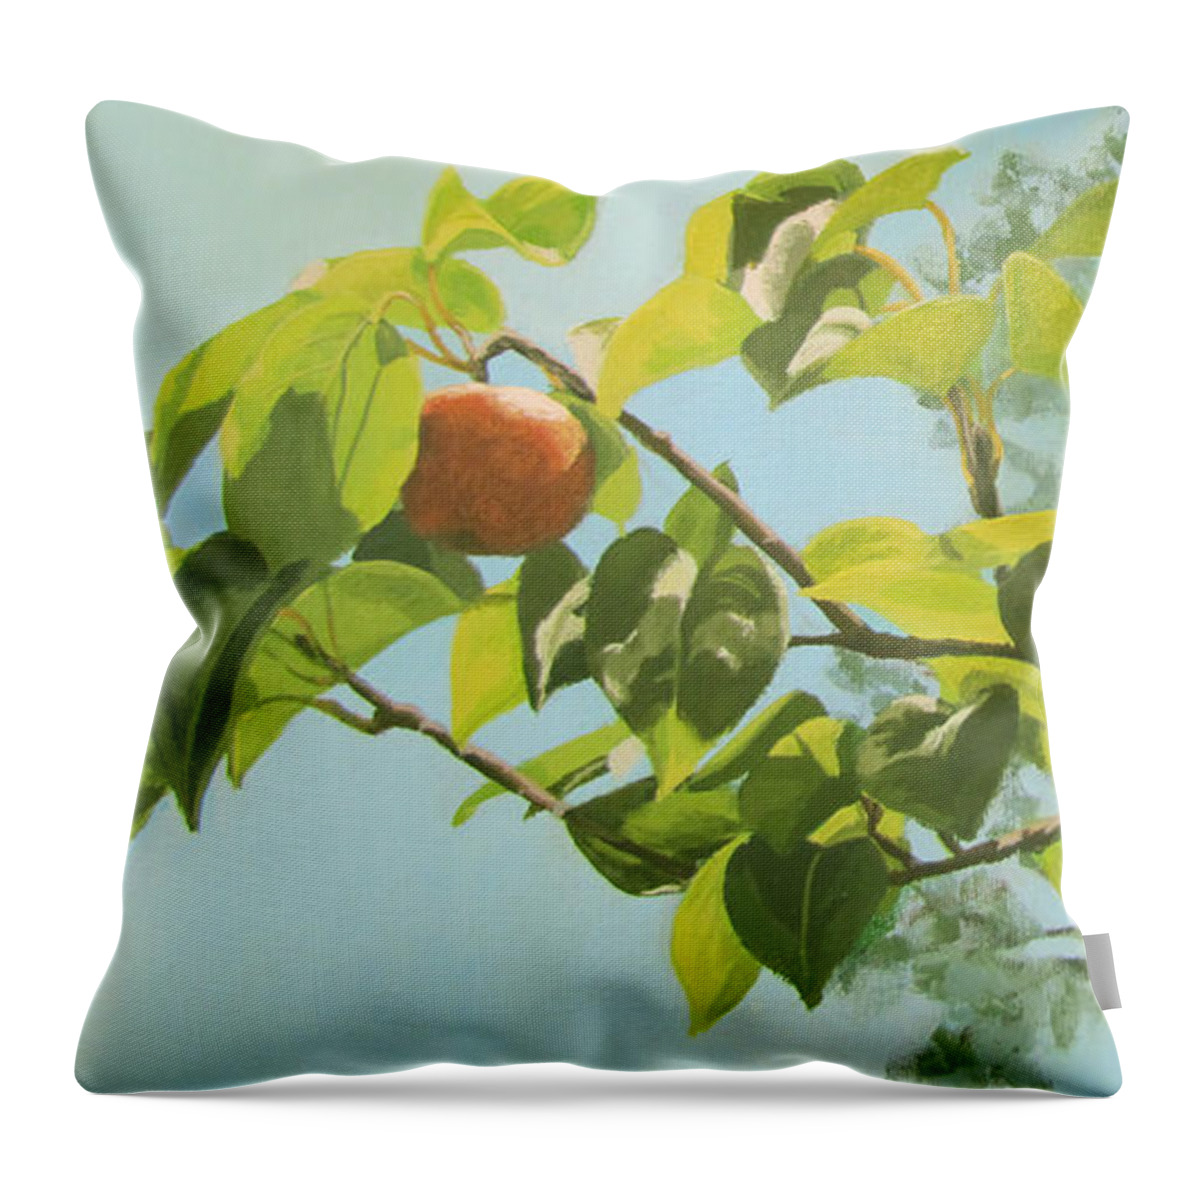 Trees Throw Pillow featuring the painting Apple A Day by Karen Ilari